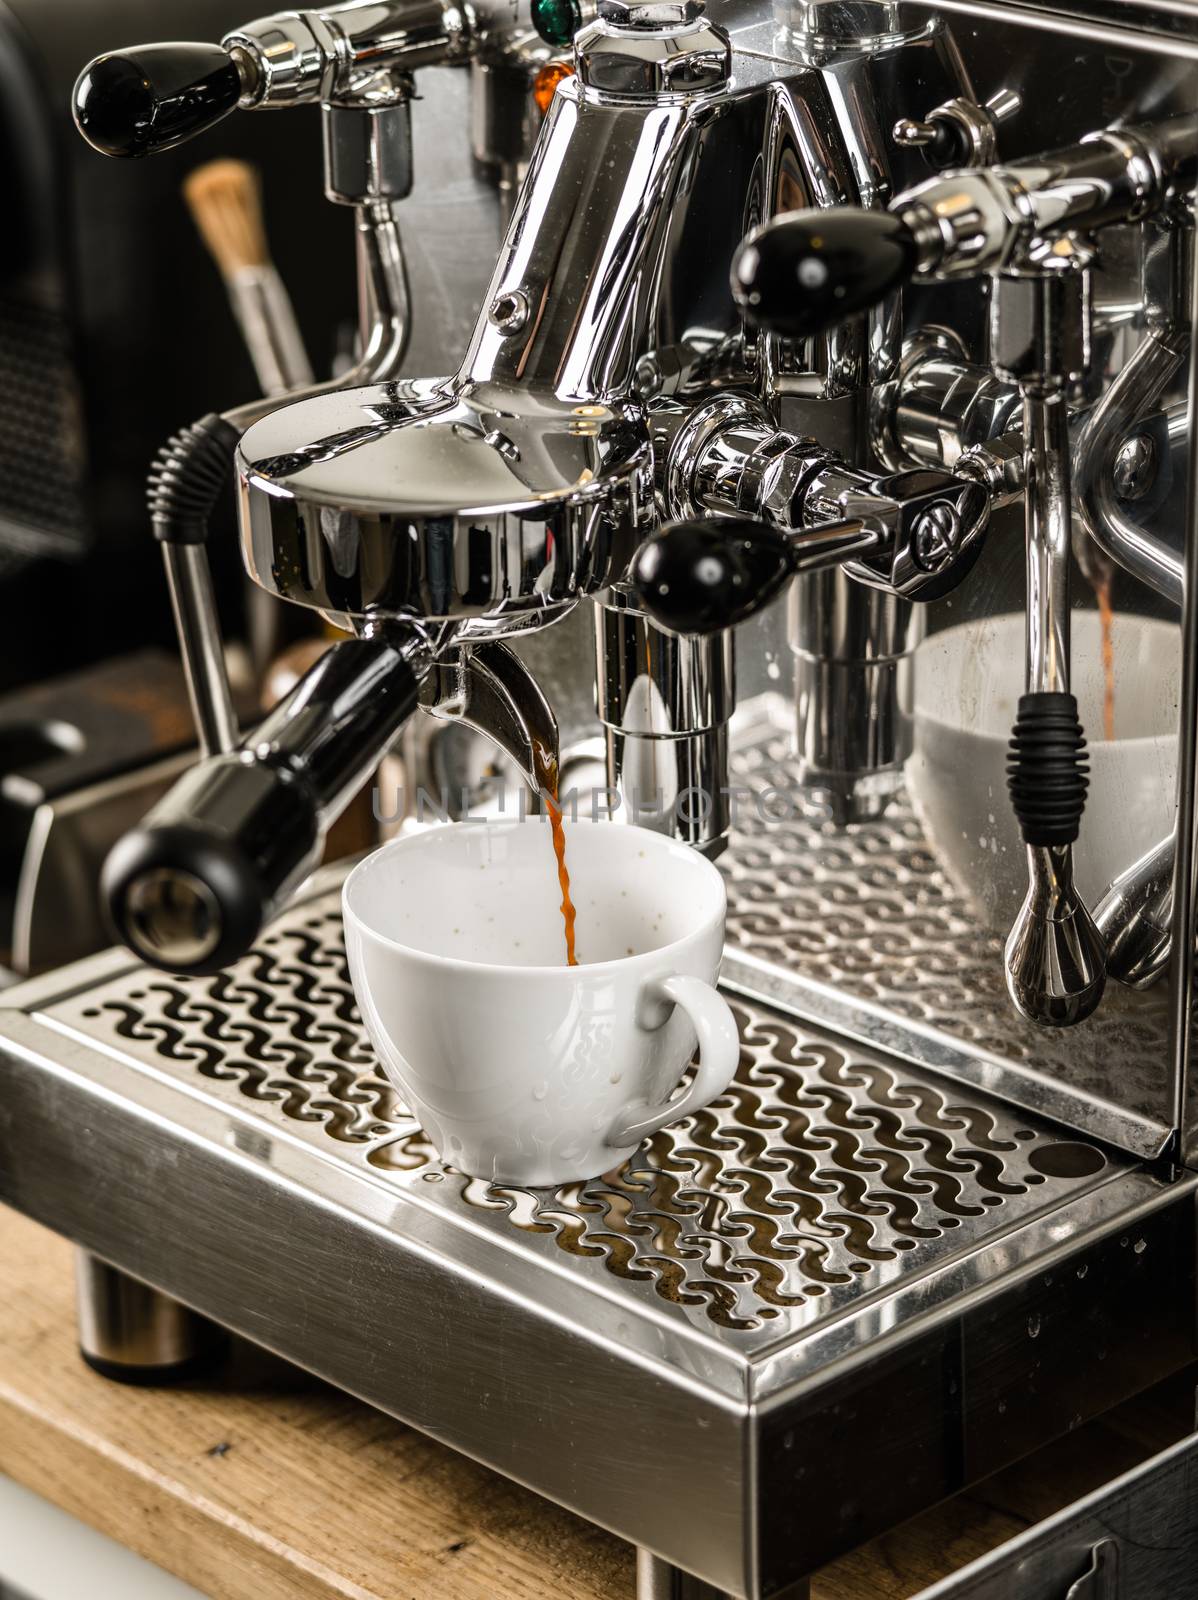 Espresso being made in coffeeshop by sumners